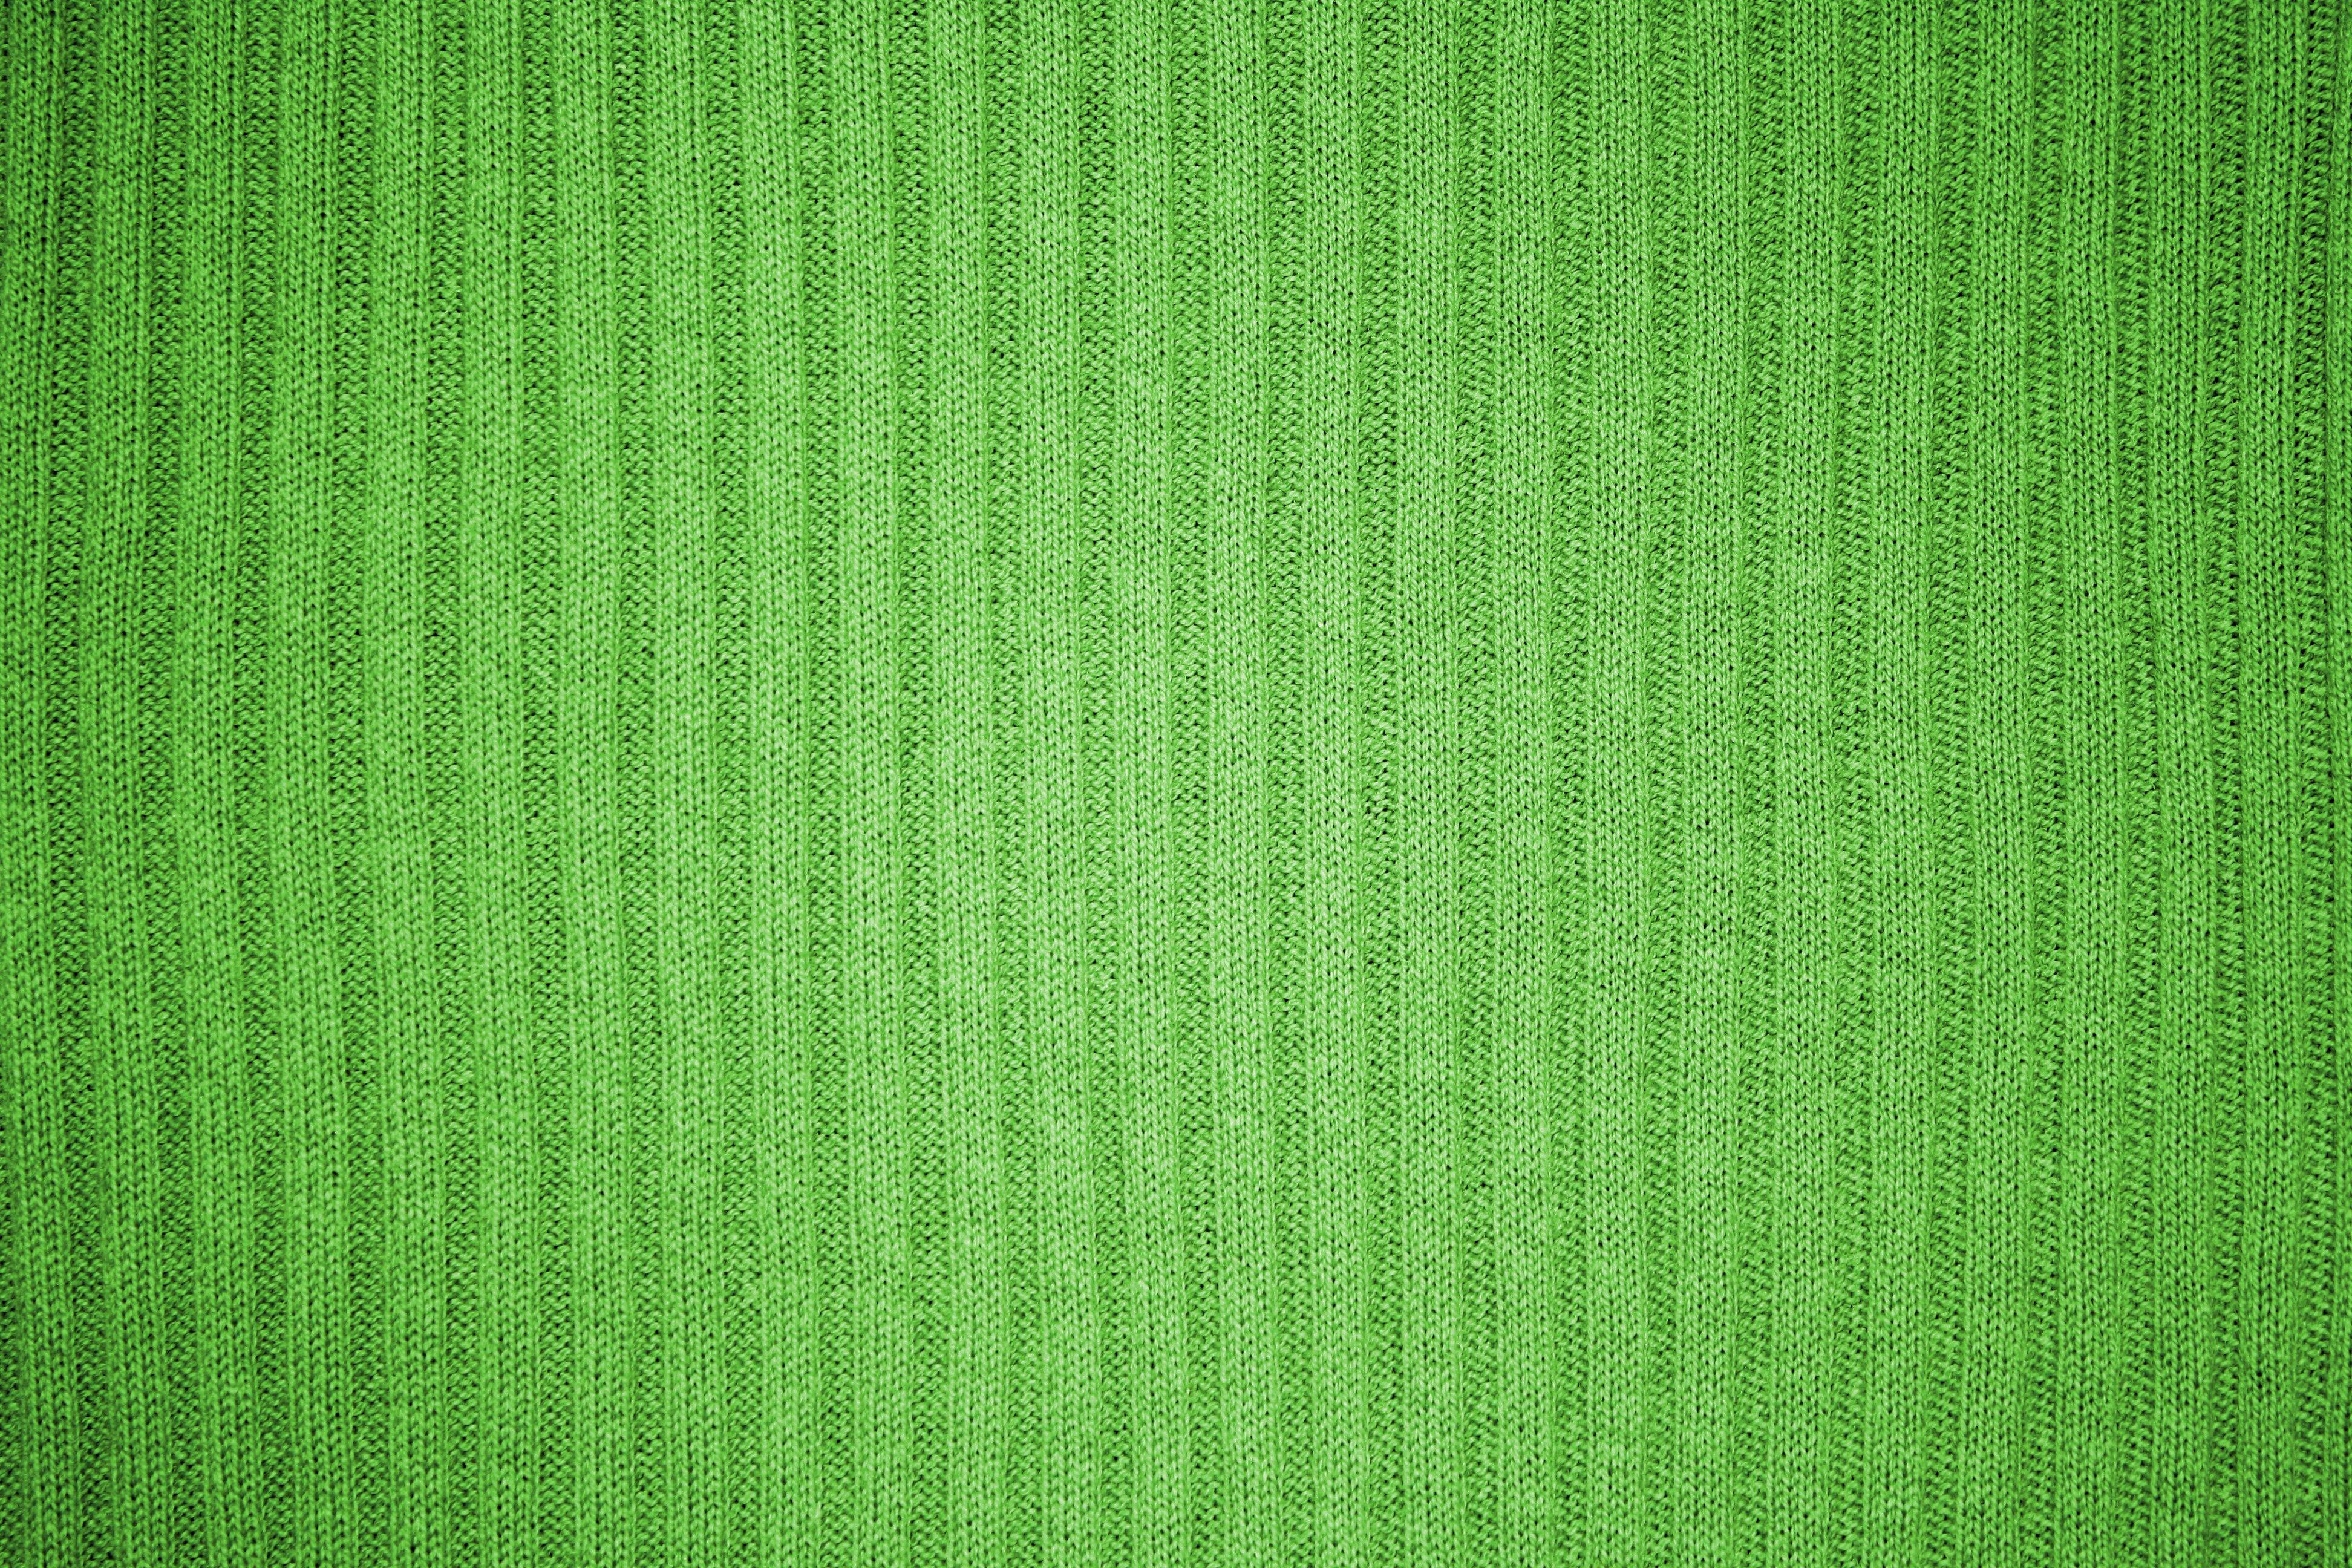 Lime Green Ribbed Knit Fabric Texture Picture Free Photograph